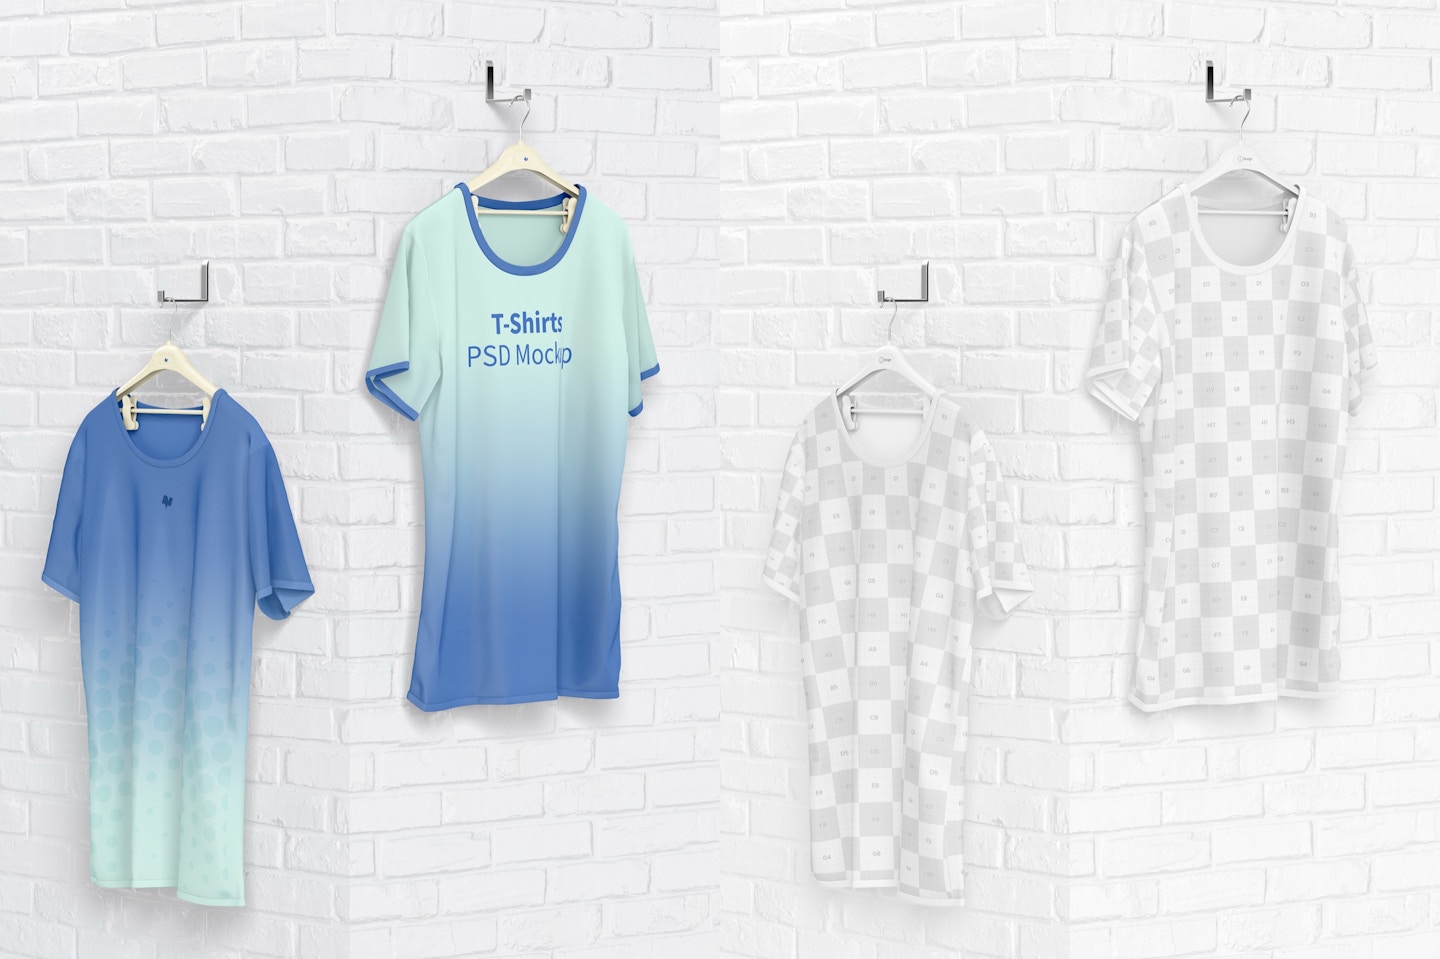 Hanging T-Shirts Mockup, Perspective View